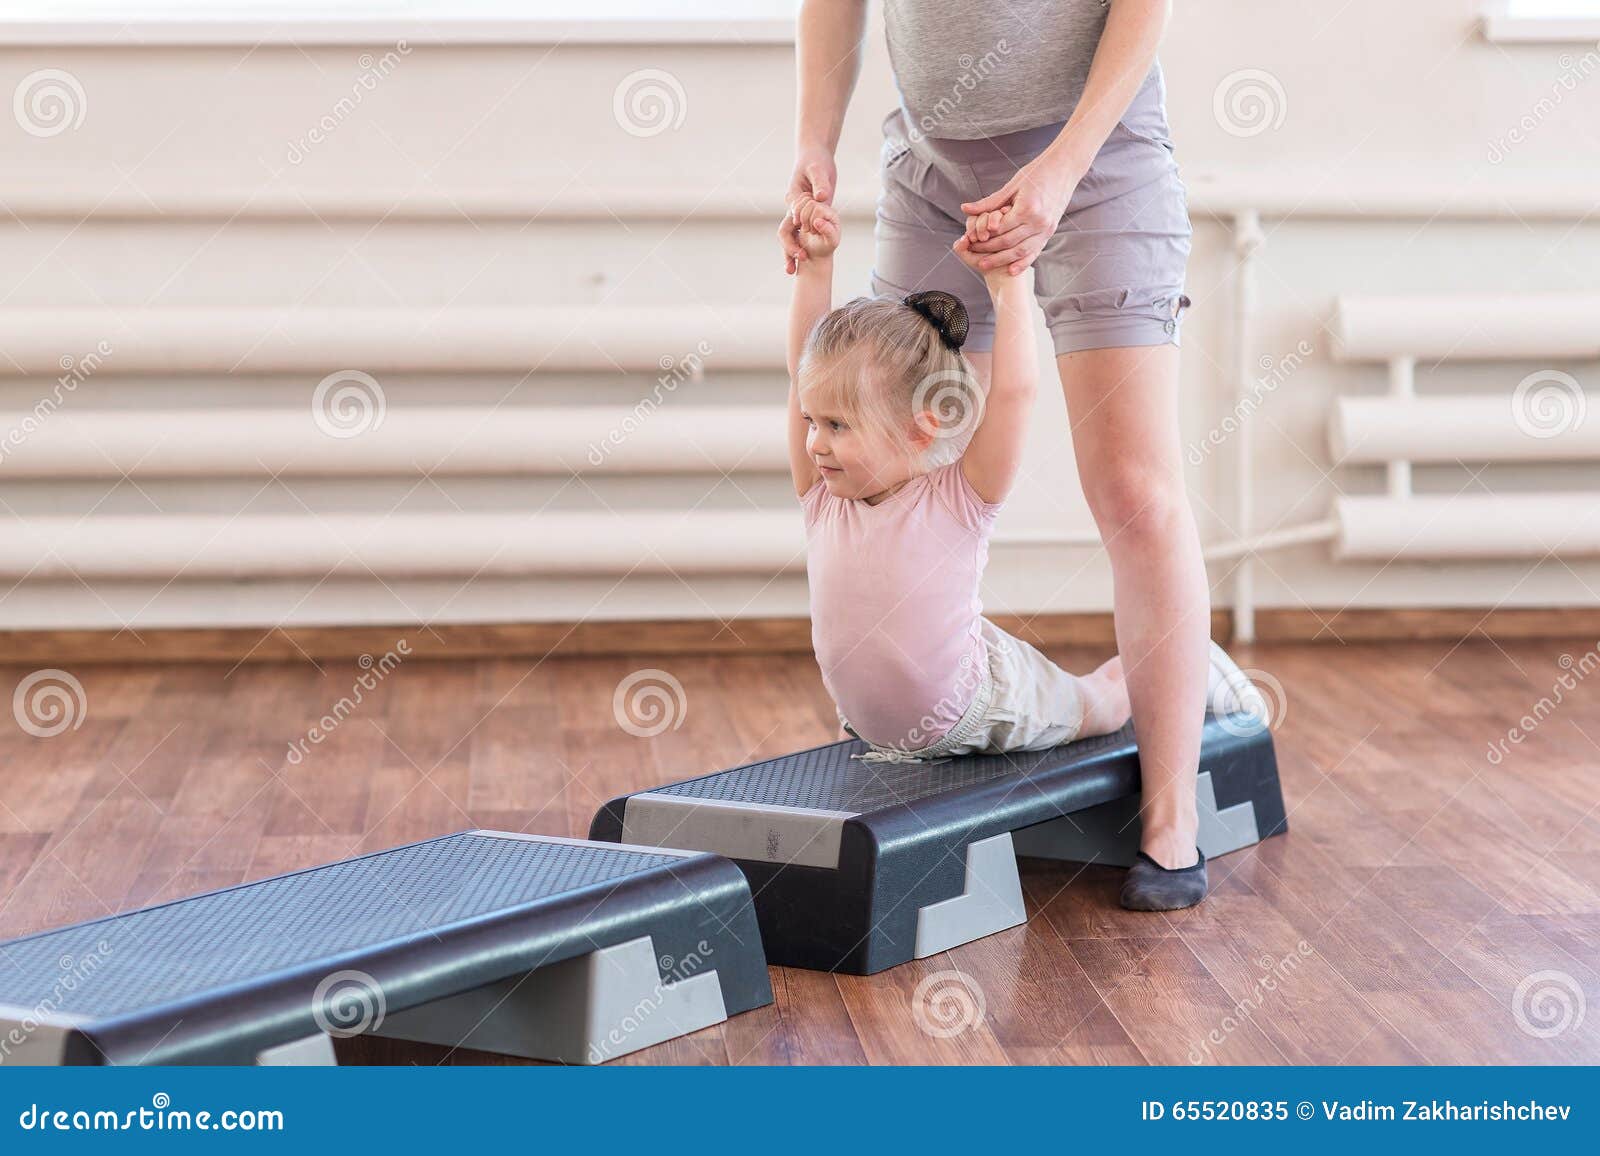 Exercises Gymnastics Coach With A Daughter Stock Image Image Of Body 